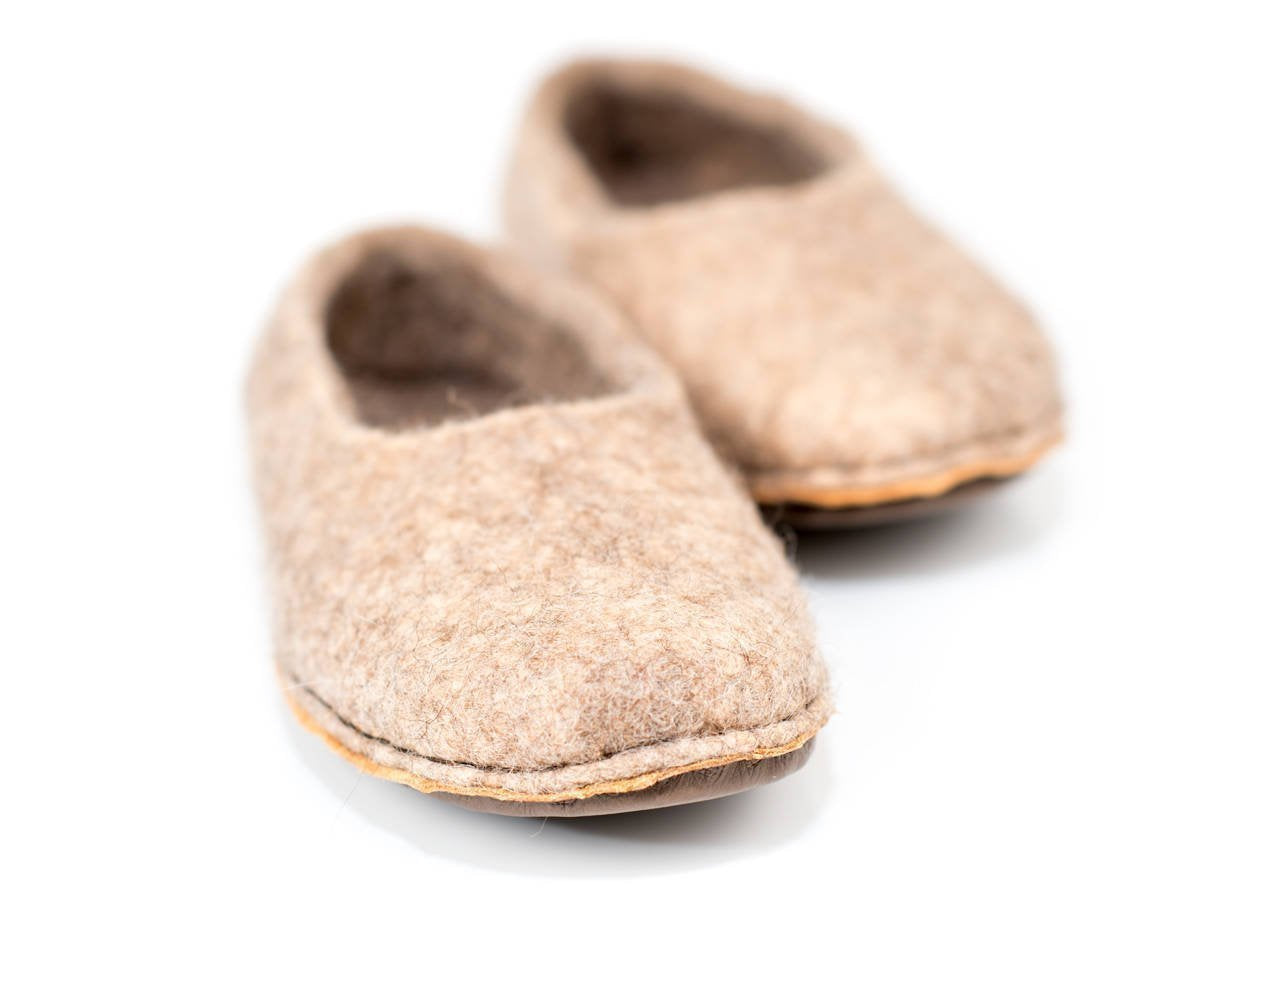 Beige felted sheep and alpaca wool slippers for women